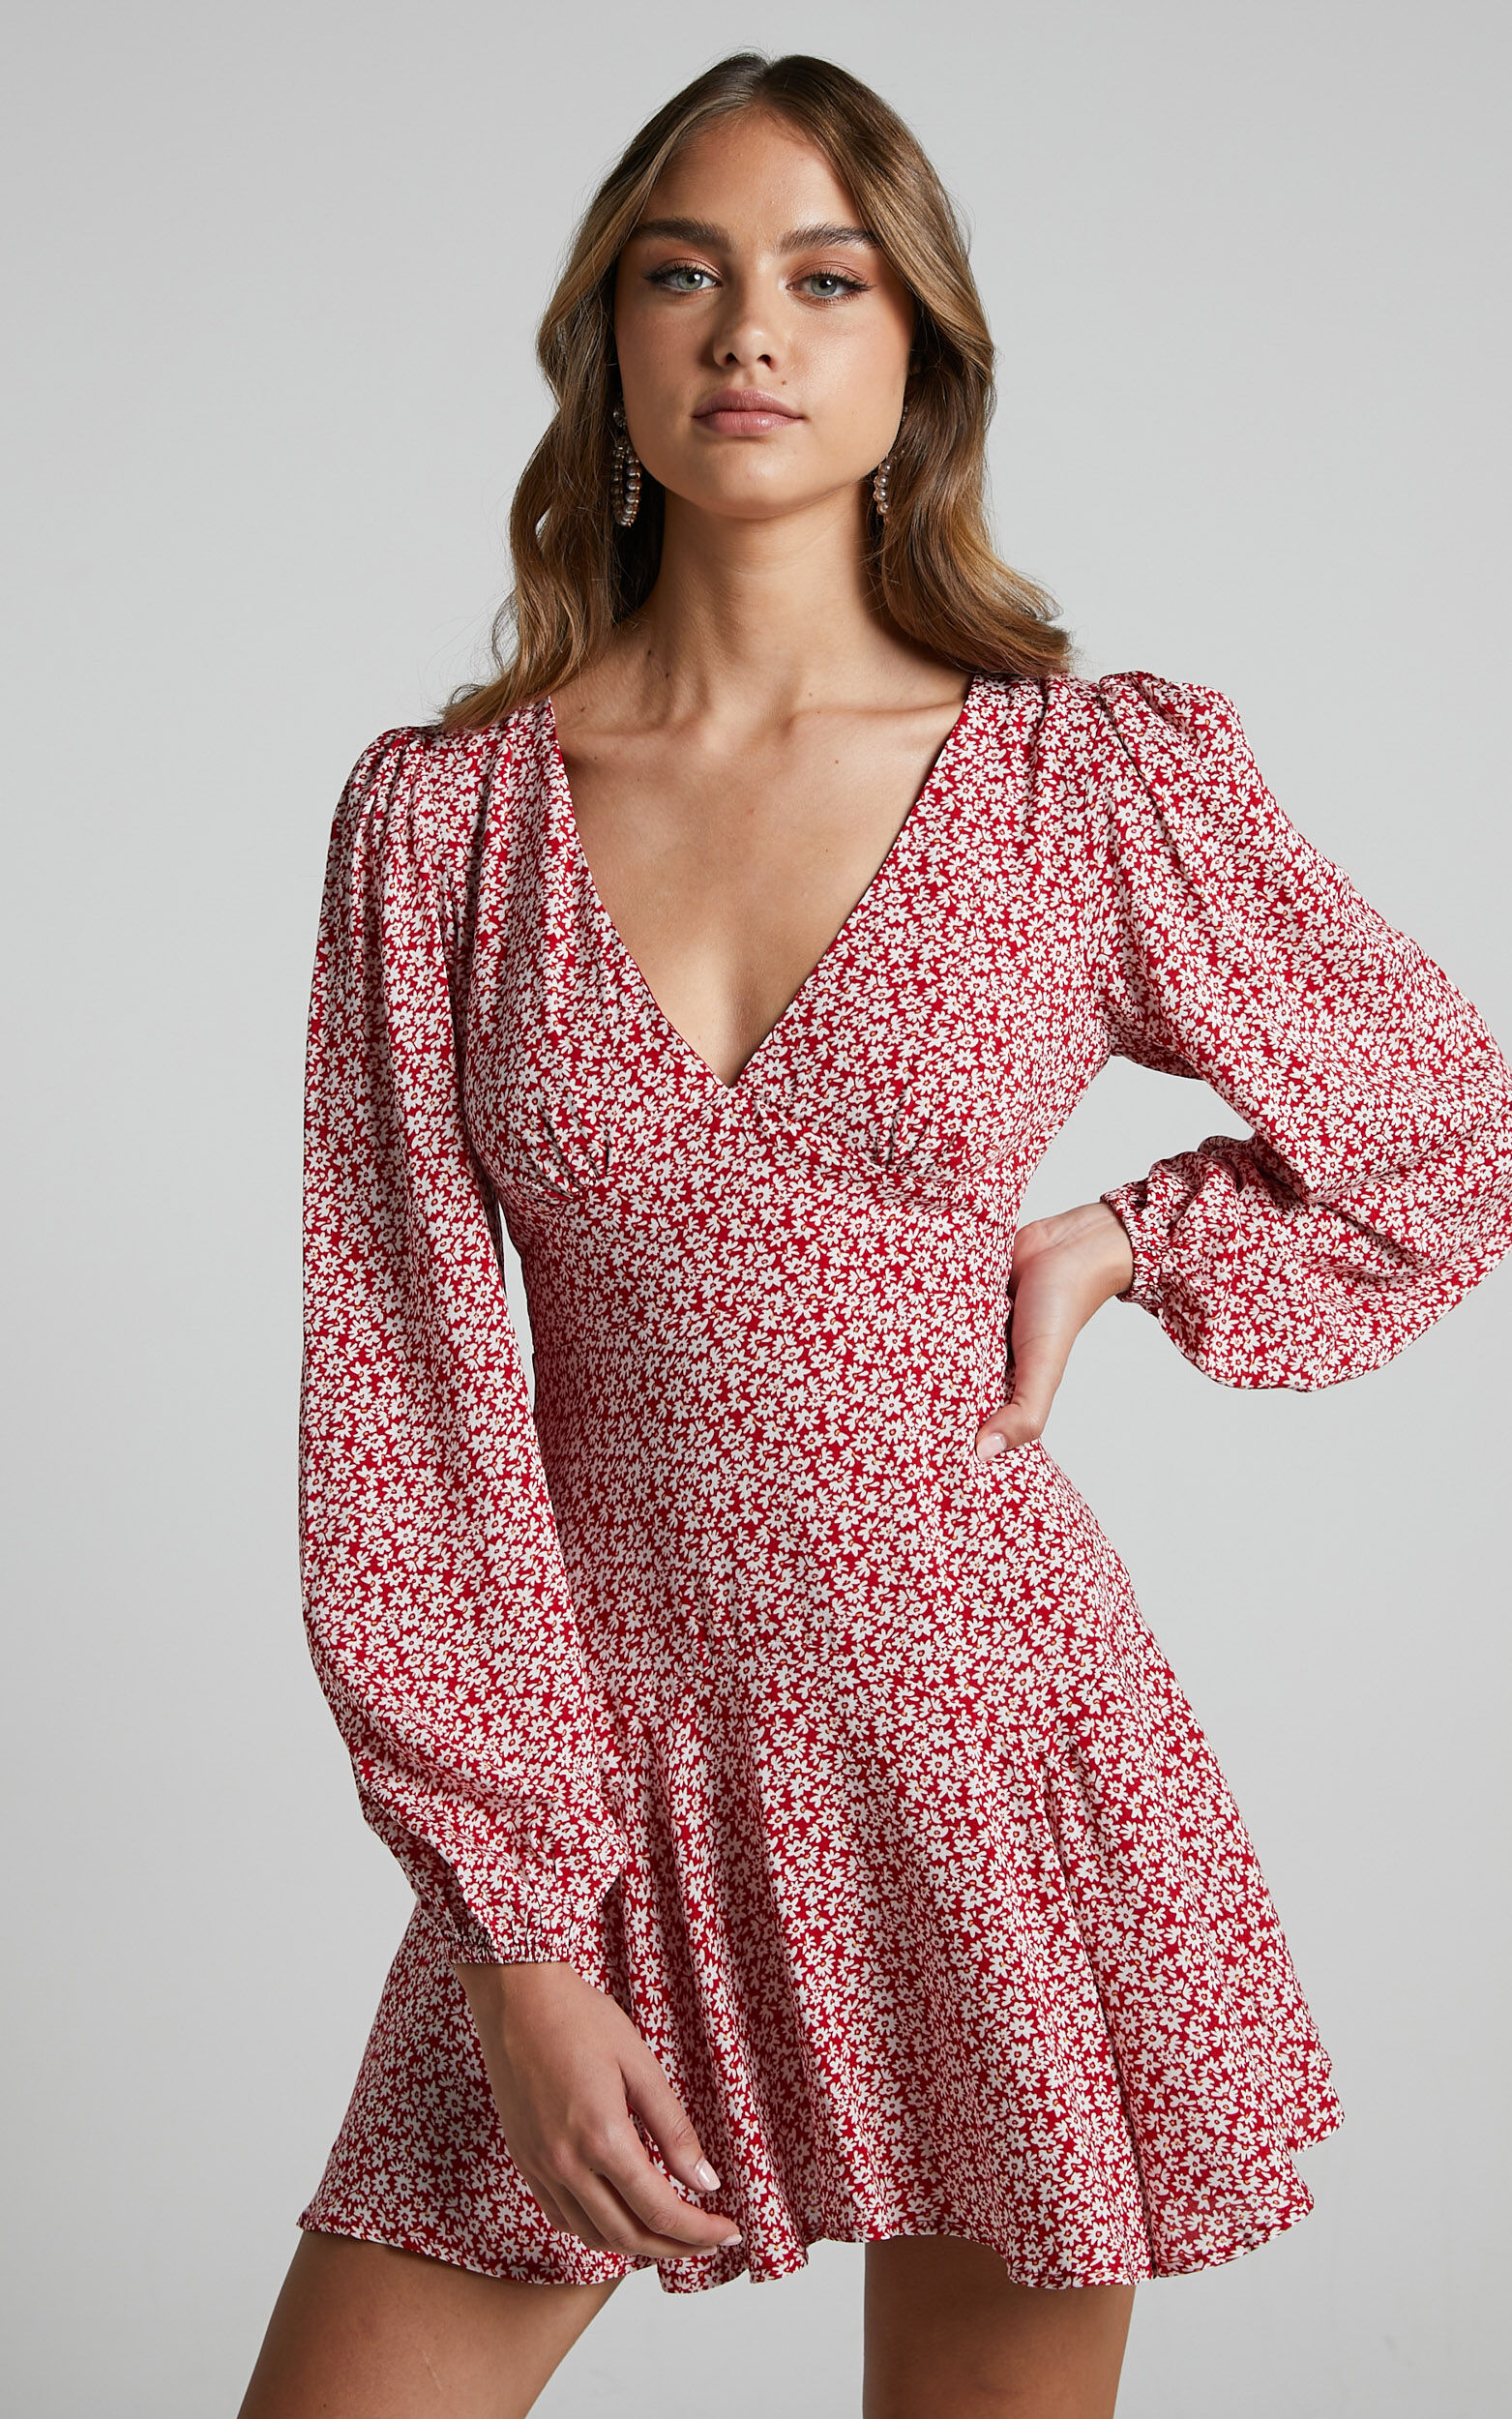 Riecha Long Sleeve Mini Dress in Red Ditsy Floral - 04, RED1, super-hi-res image number null